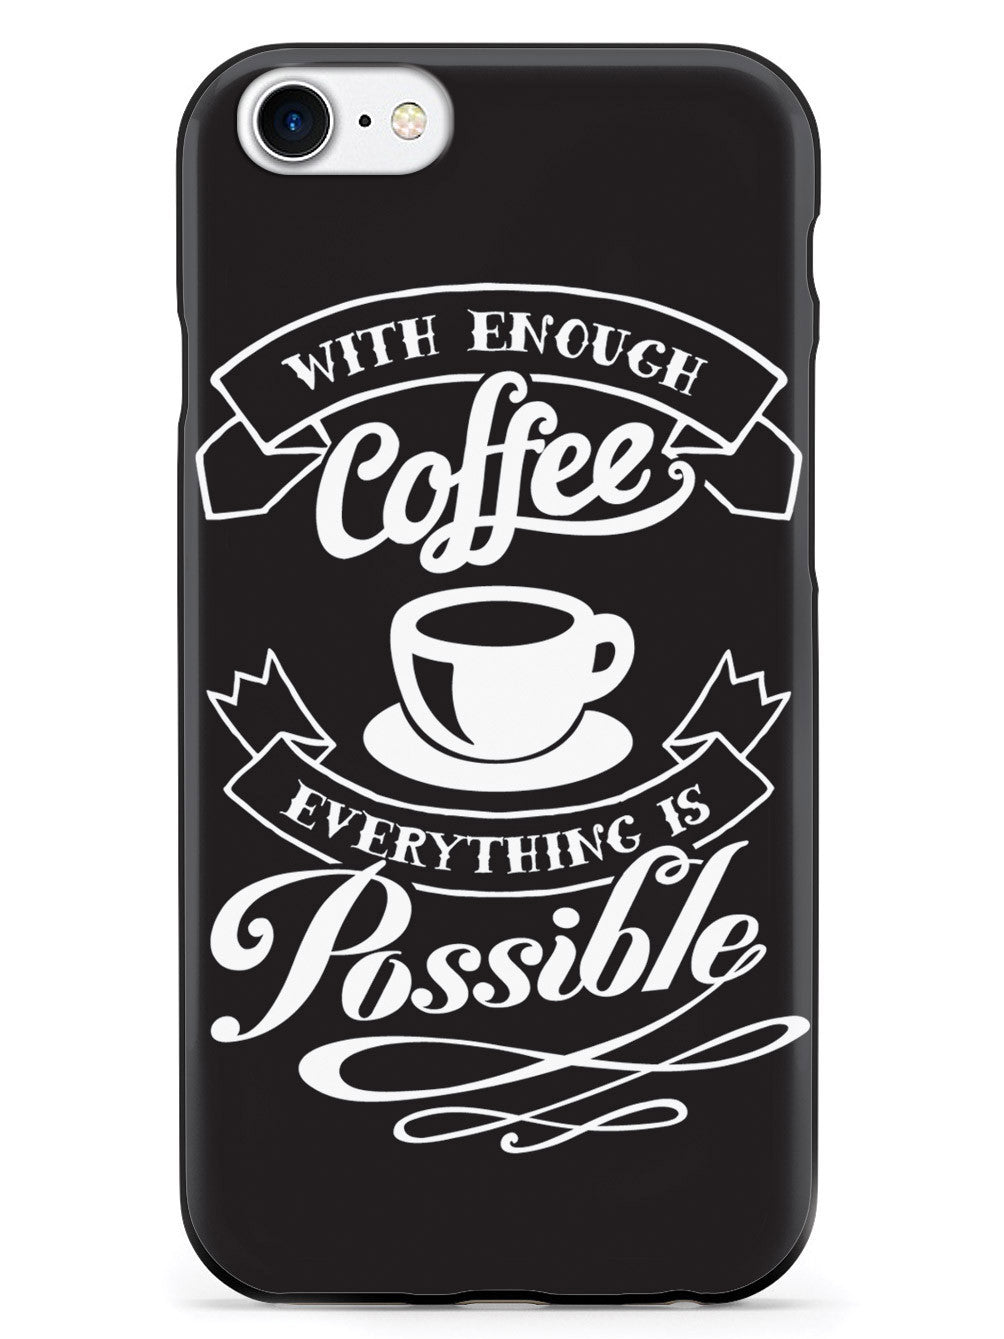 With Enough Coffee, Everything is Possible Case